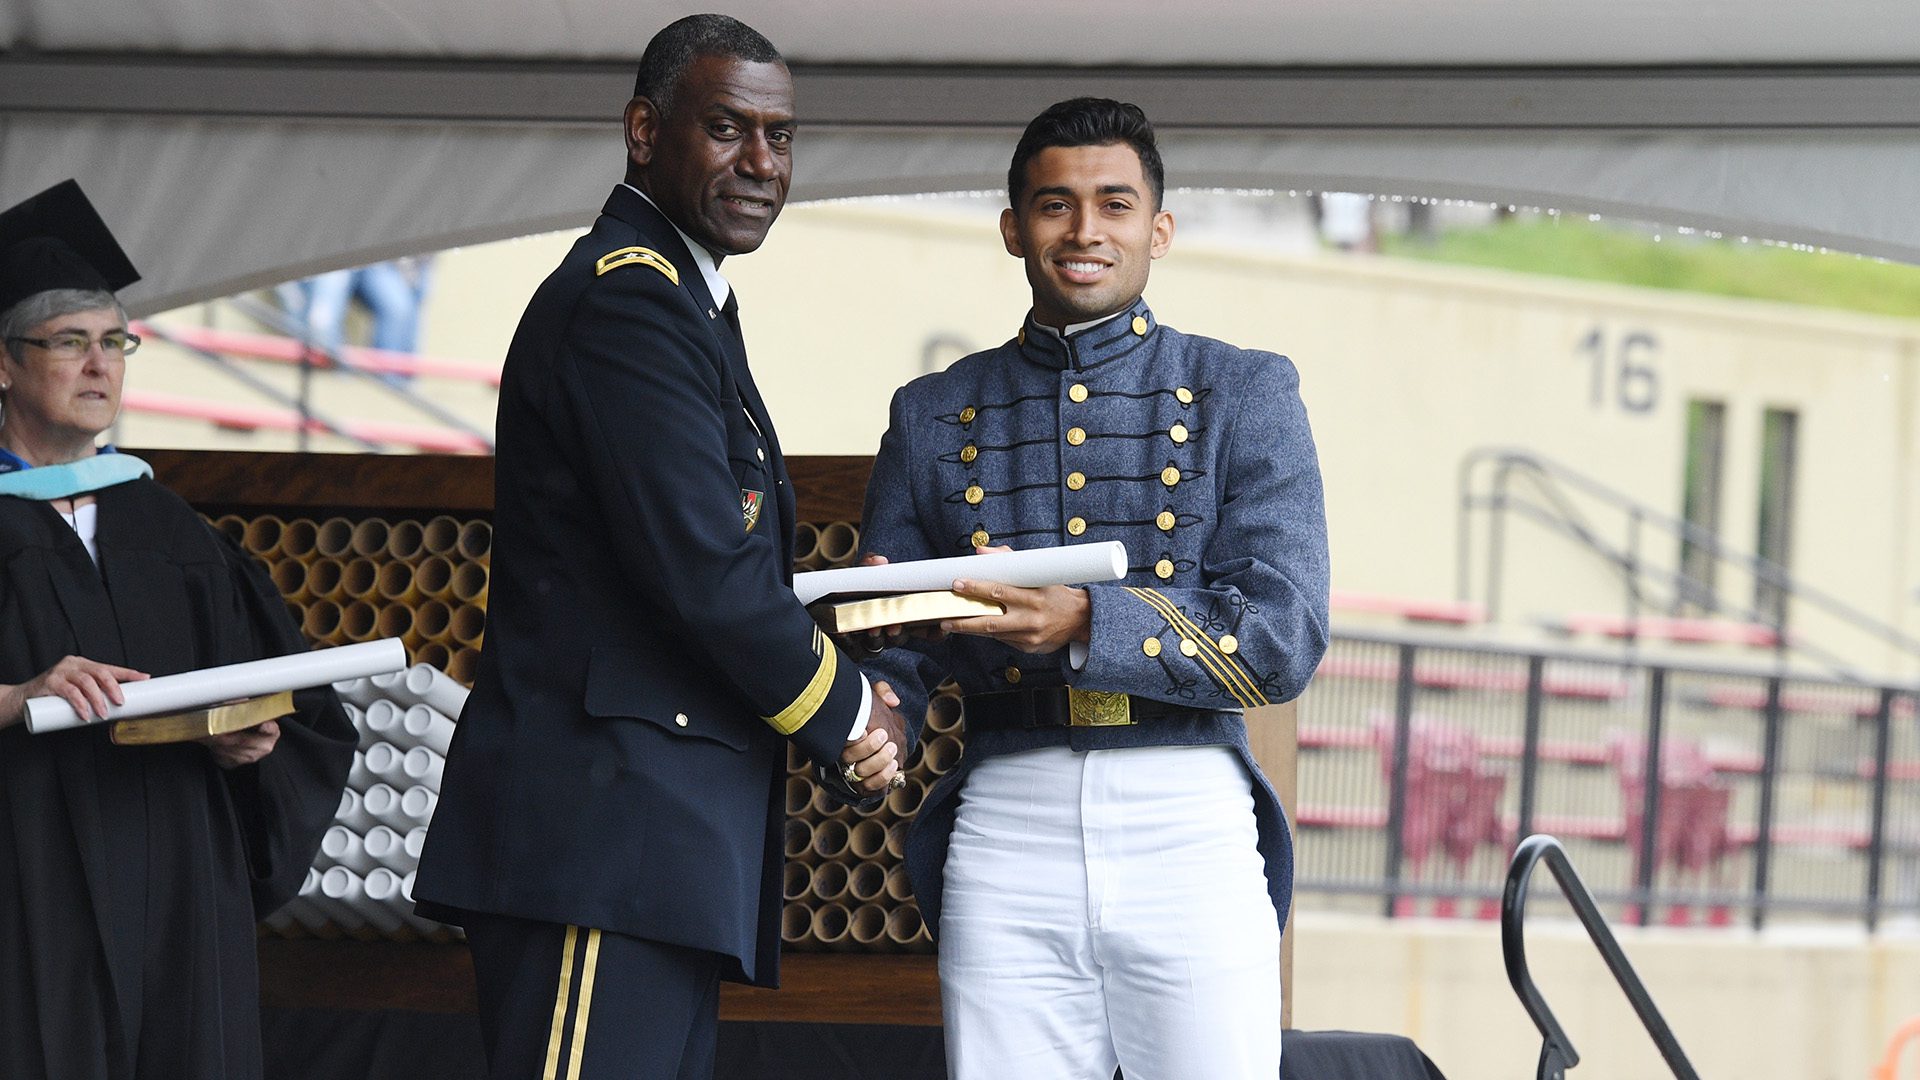 cadet shaking hands with Maj. Gen. Wins, smiling and receiving diploma